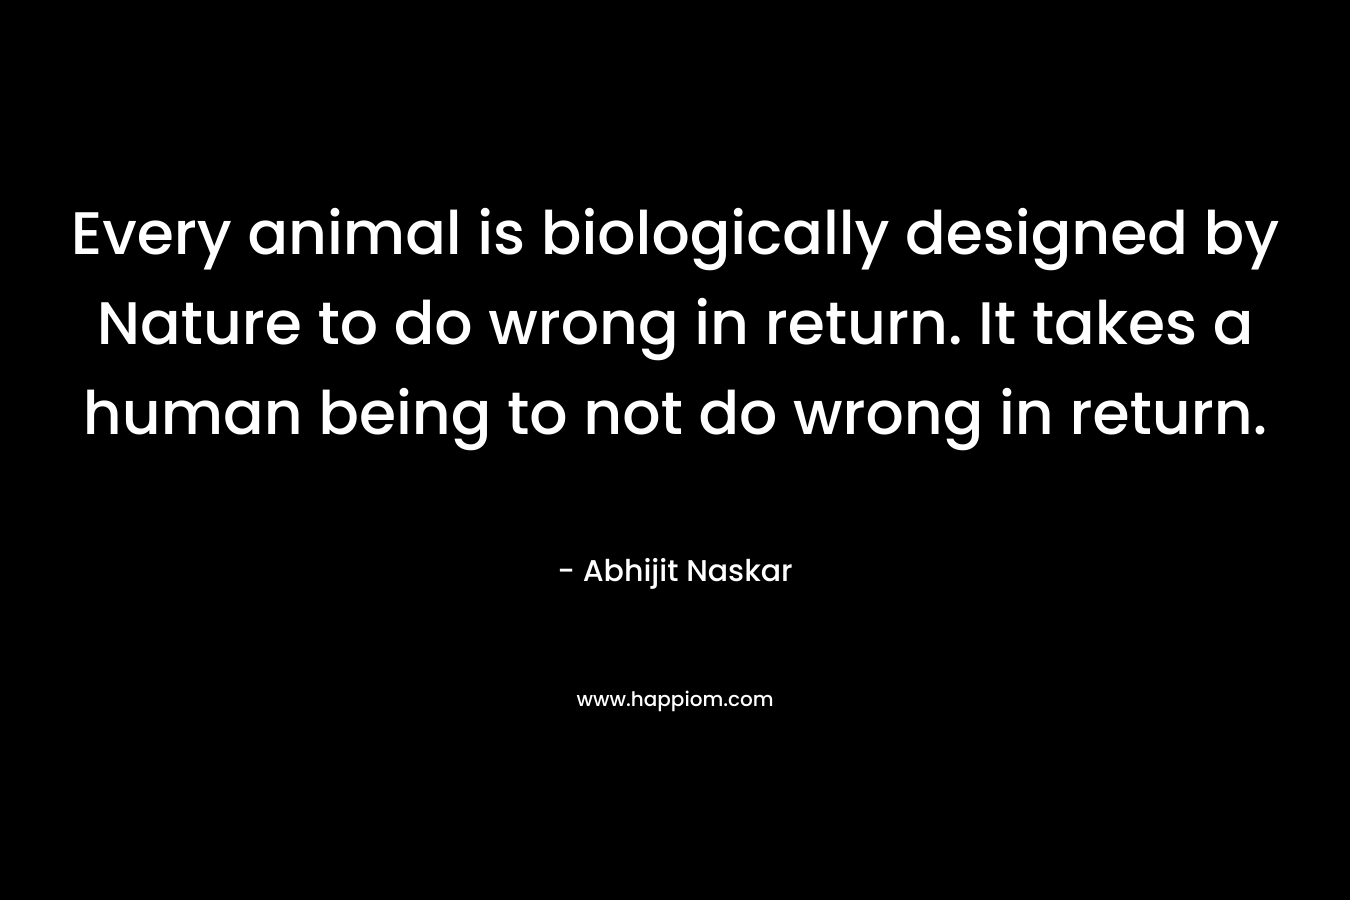 Every animal is biologically designed by Nature to do wrong in return. It takes a human being to not do wrong in return.